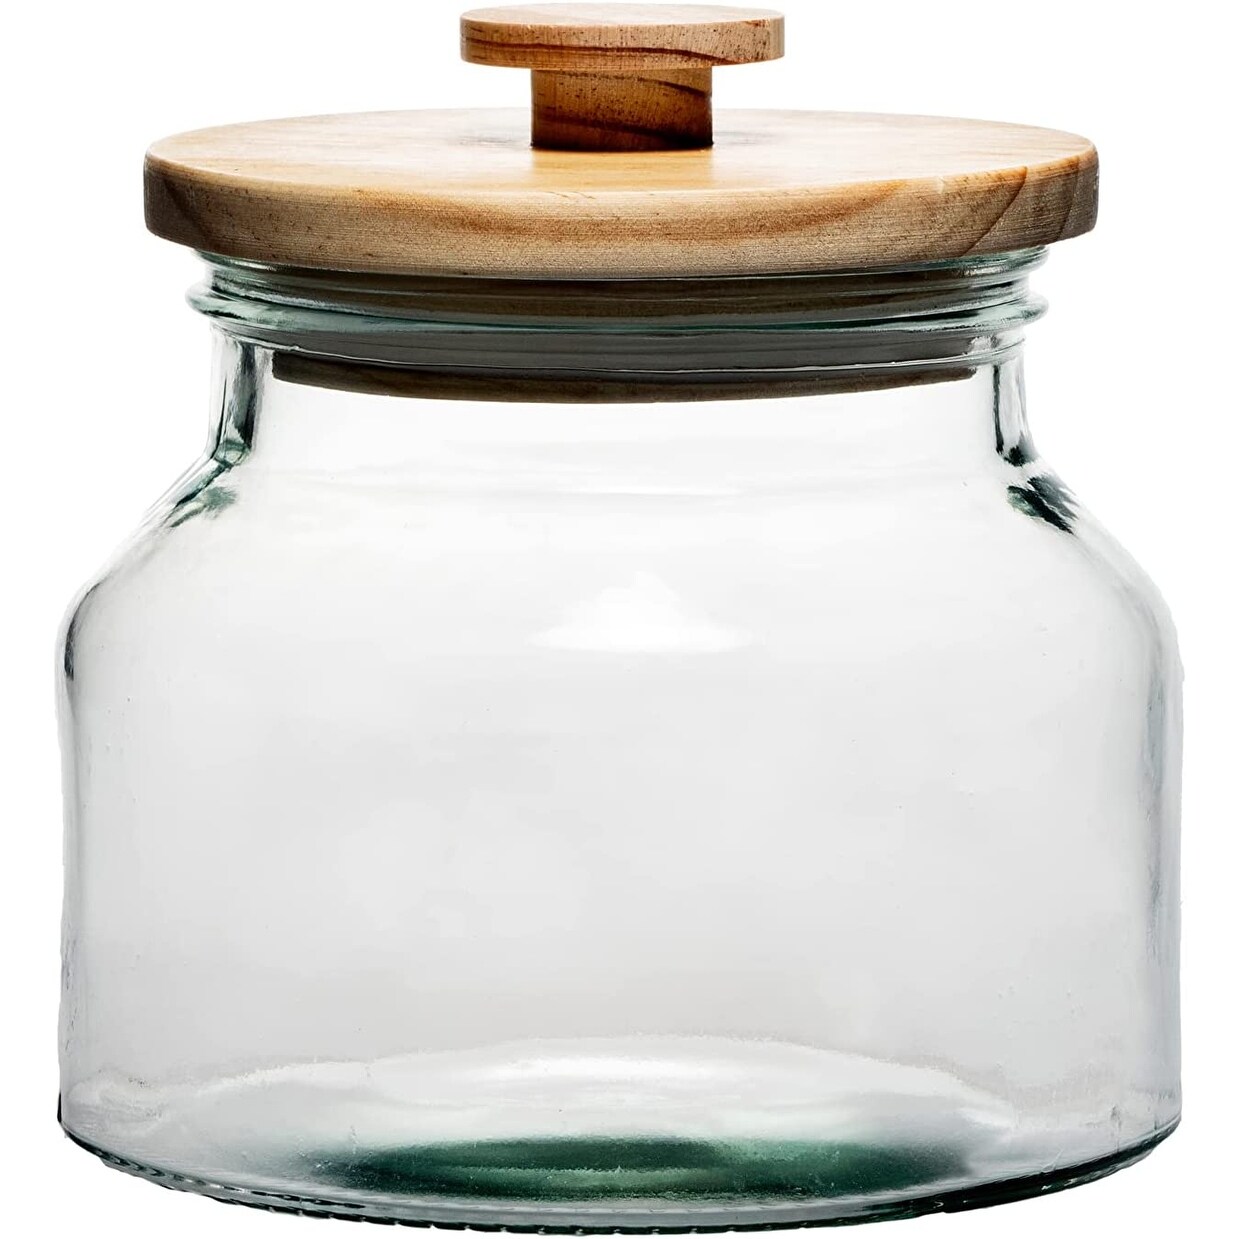 https://ak1.ostkcdn.com/images/products/is/images/direct/ecebd9554f29c974cd3d173f5f677172dcf082e8/Amici-Home-Denali-Clear-Glass-Canister-Food-Storage-Jar.jpg